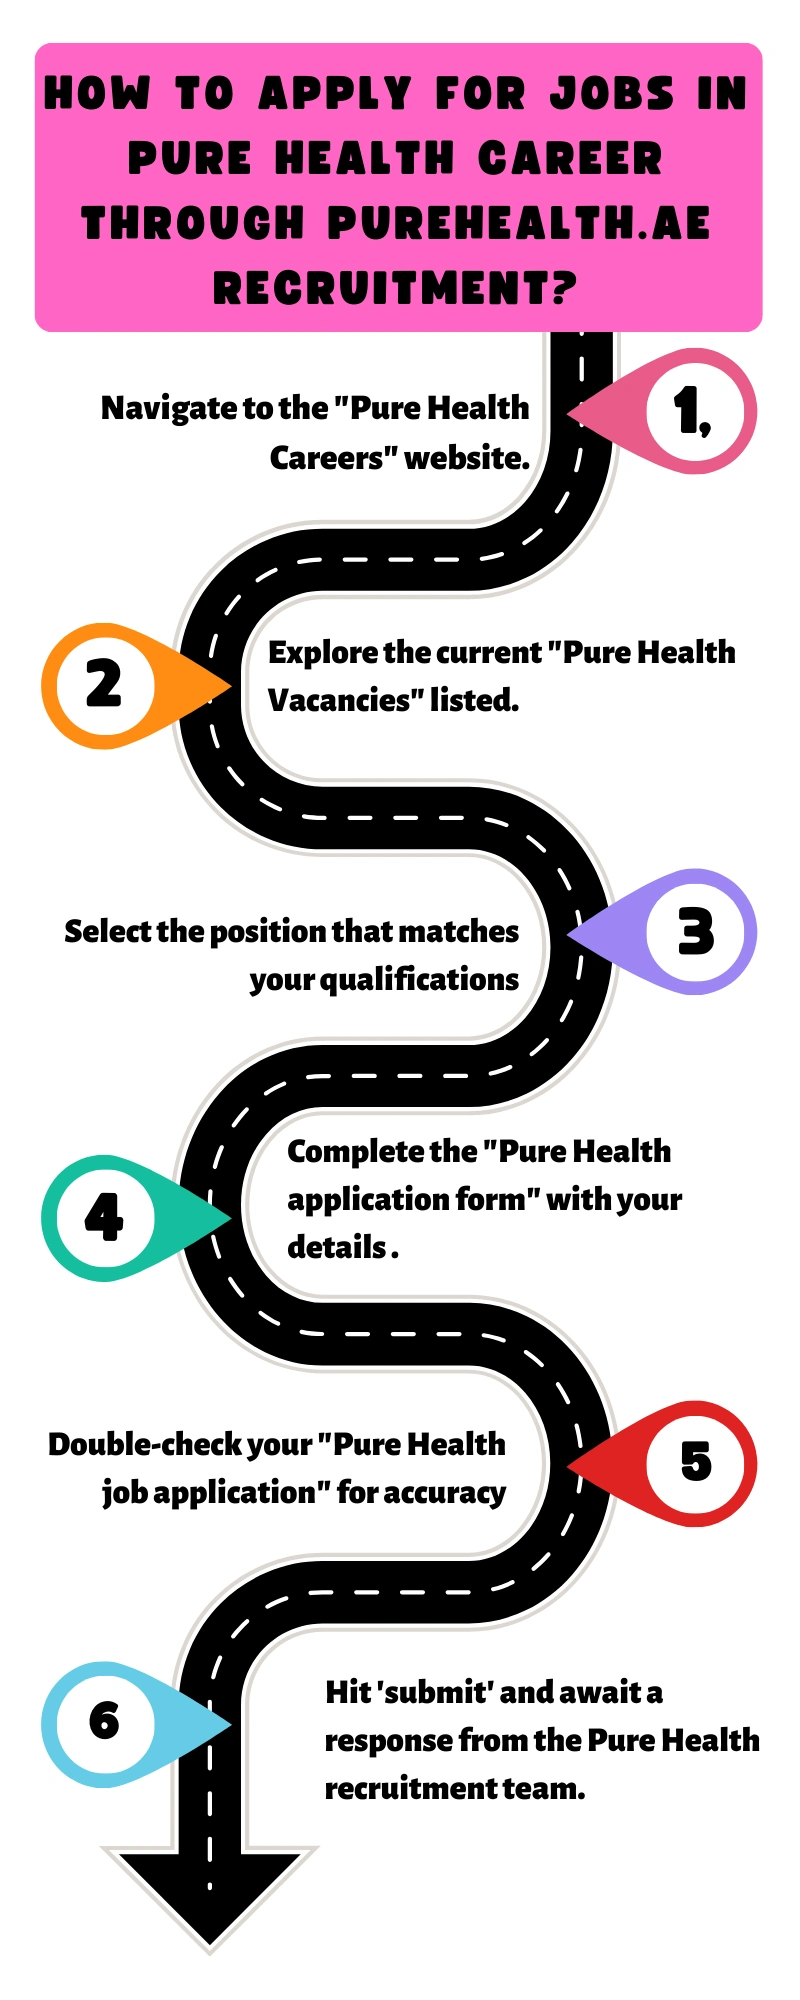 How to Apply for Jobs in Pure Health Career through purehealth.ae recruitment?